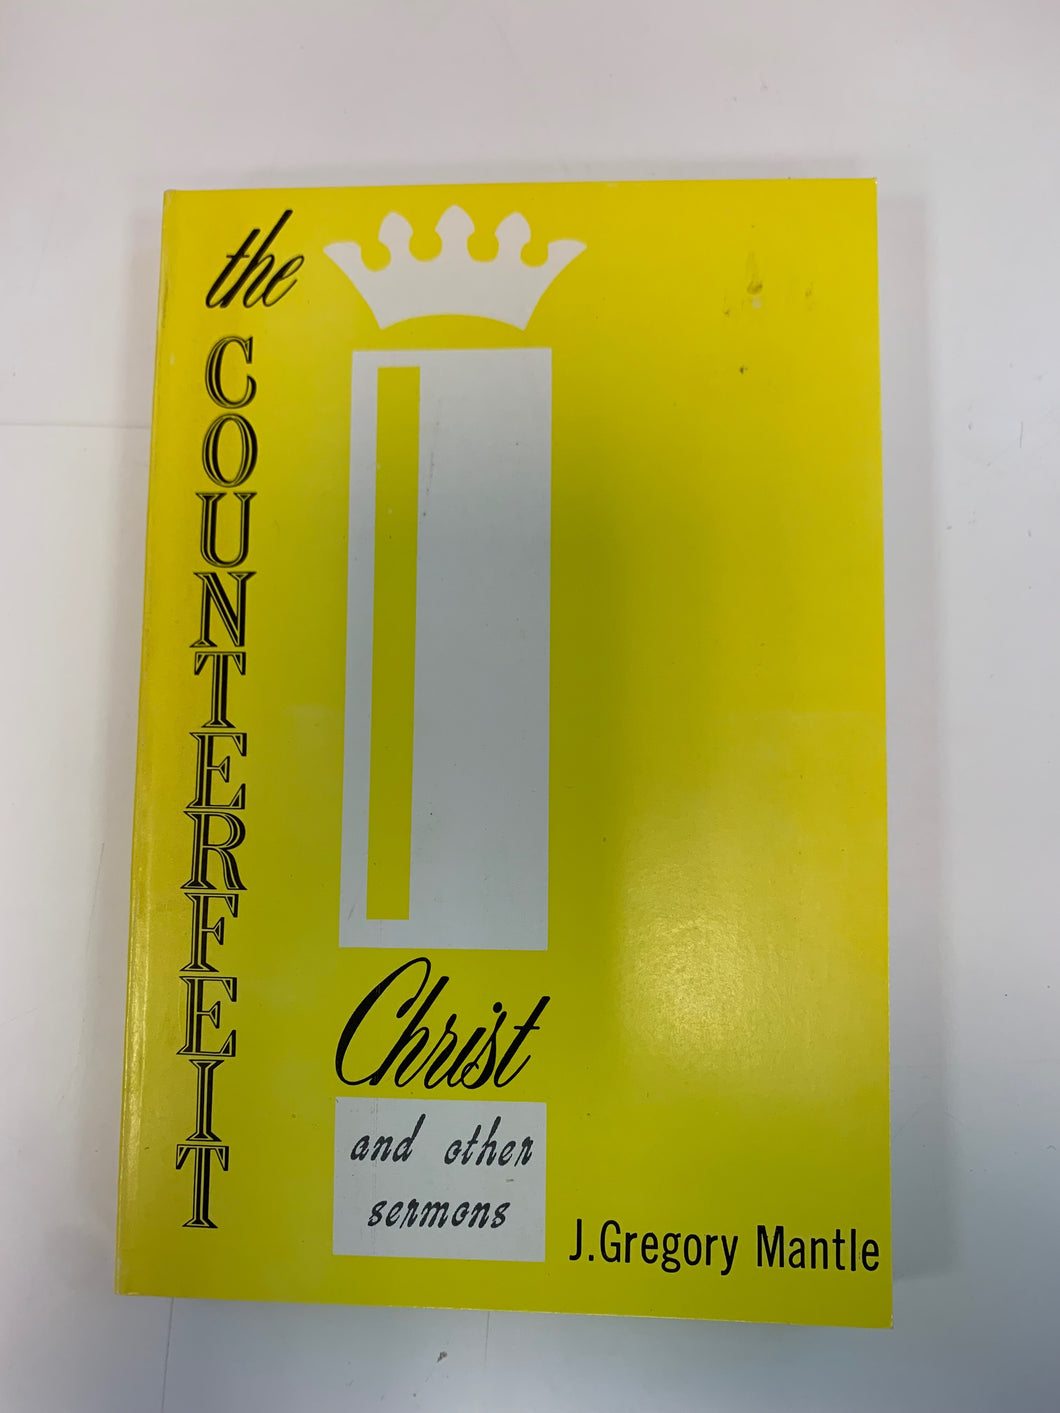 The Counterfeit Christ and Other Sermons by J. Gregory Mantle